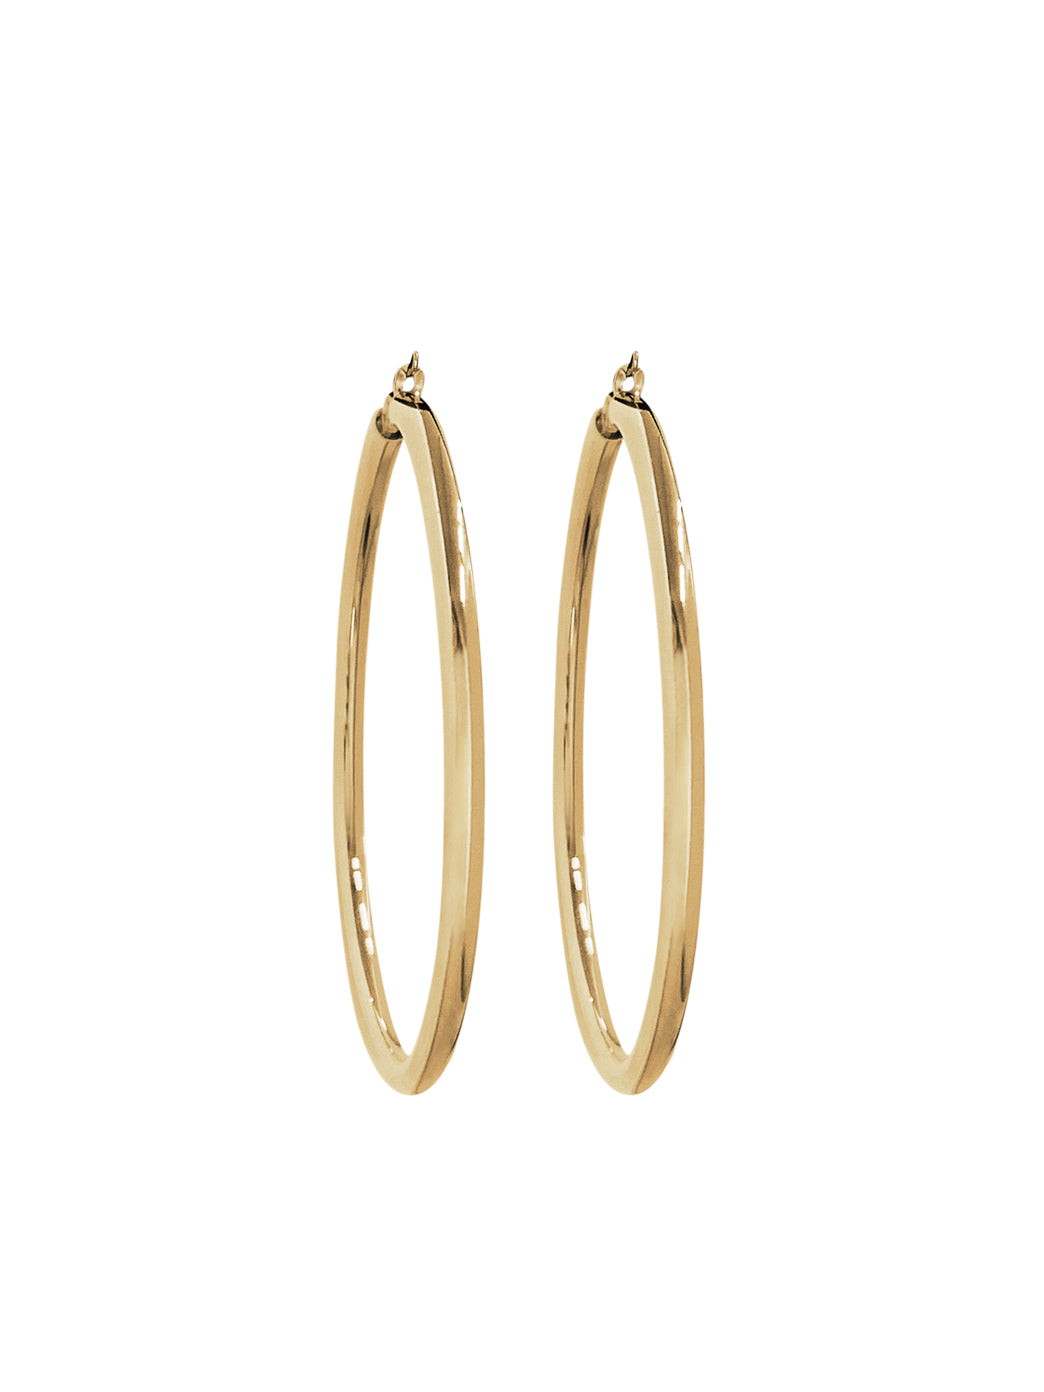 Fiorina Jewellery Gold Hoops Side View